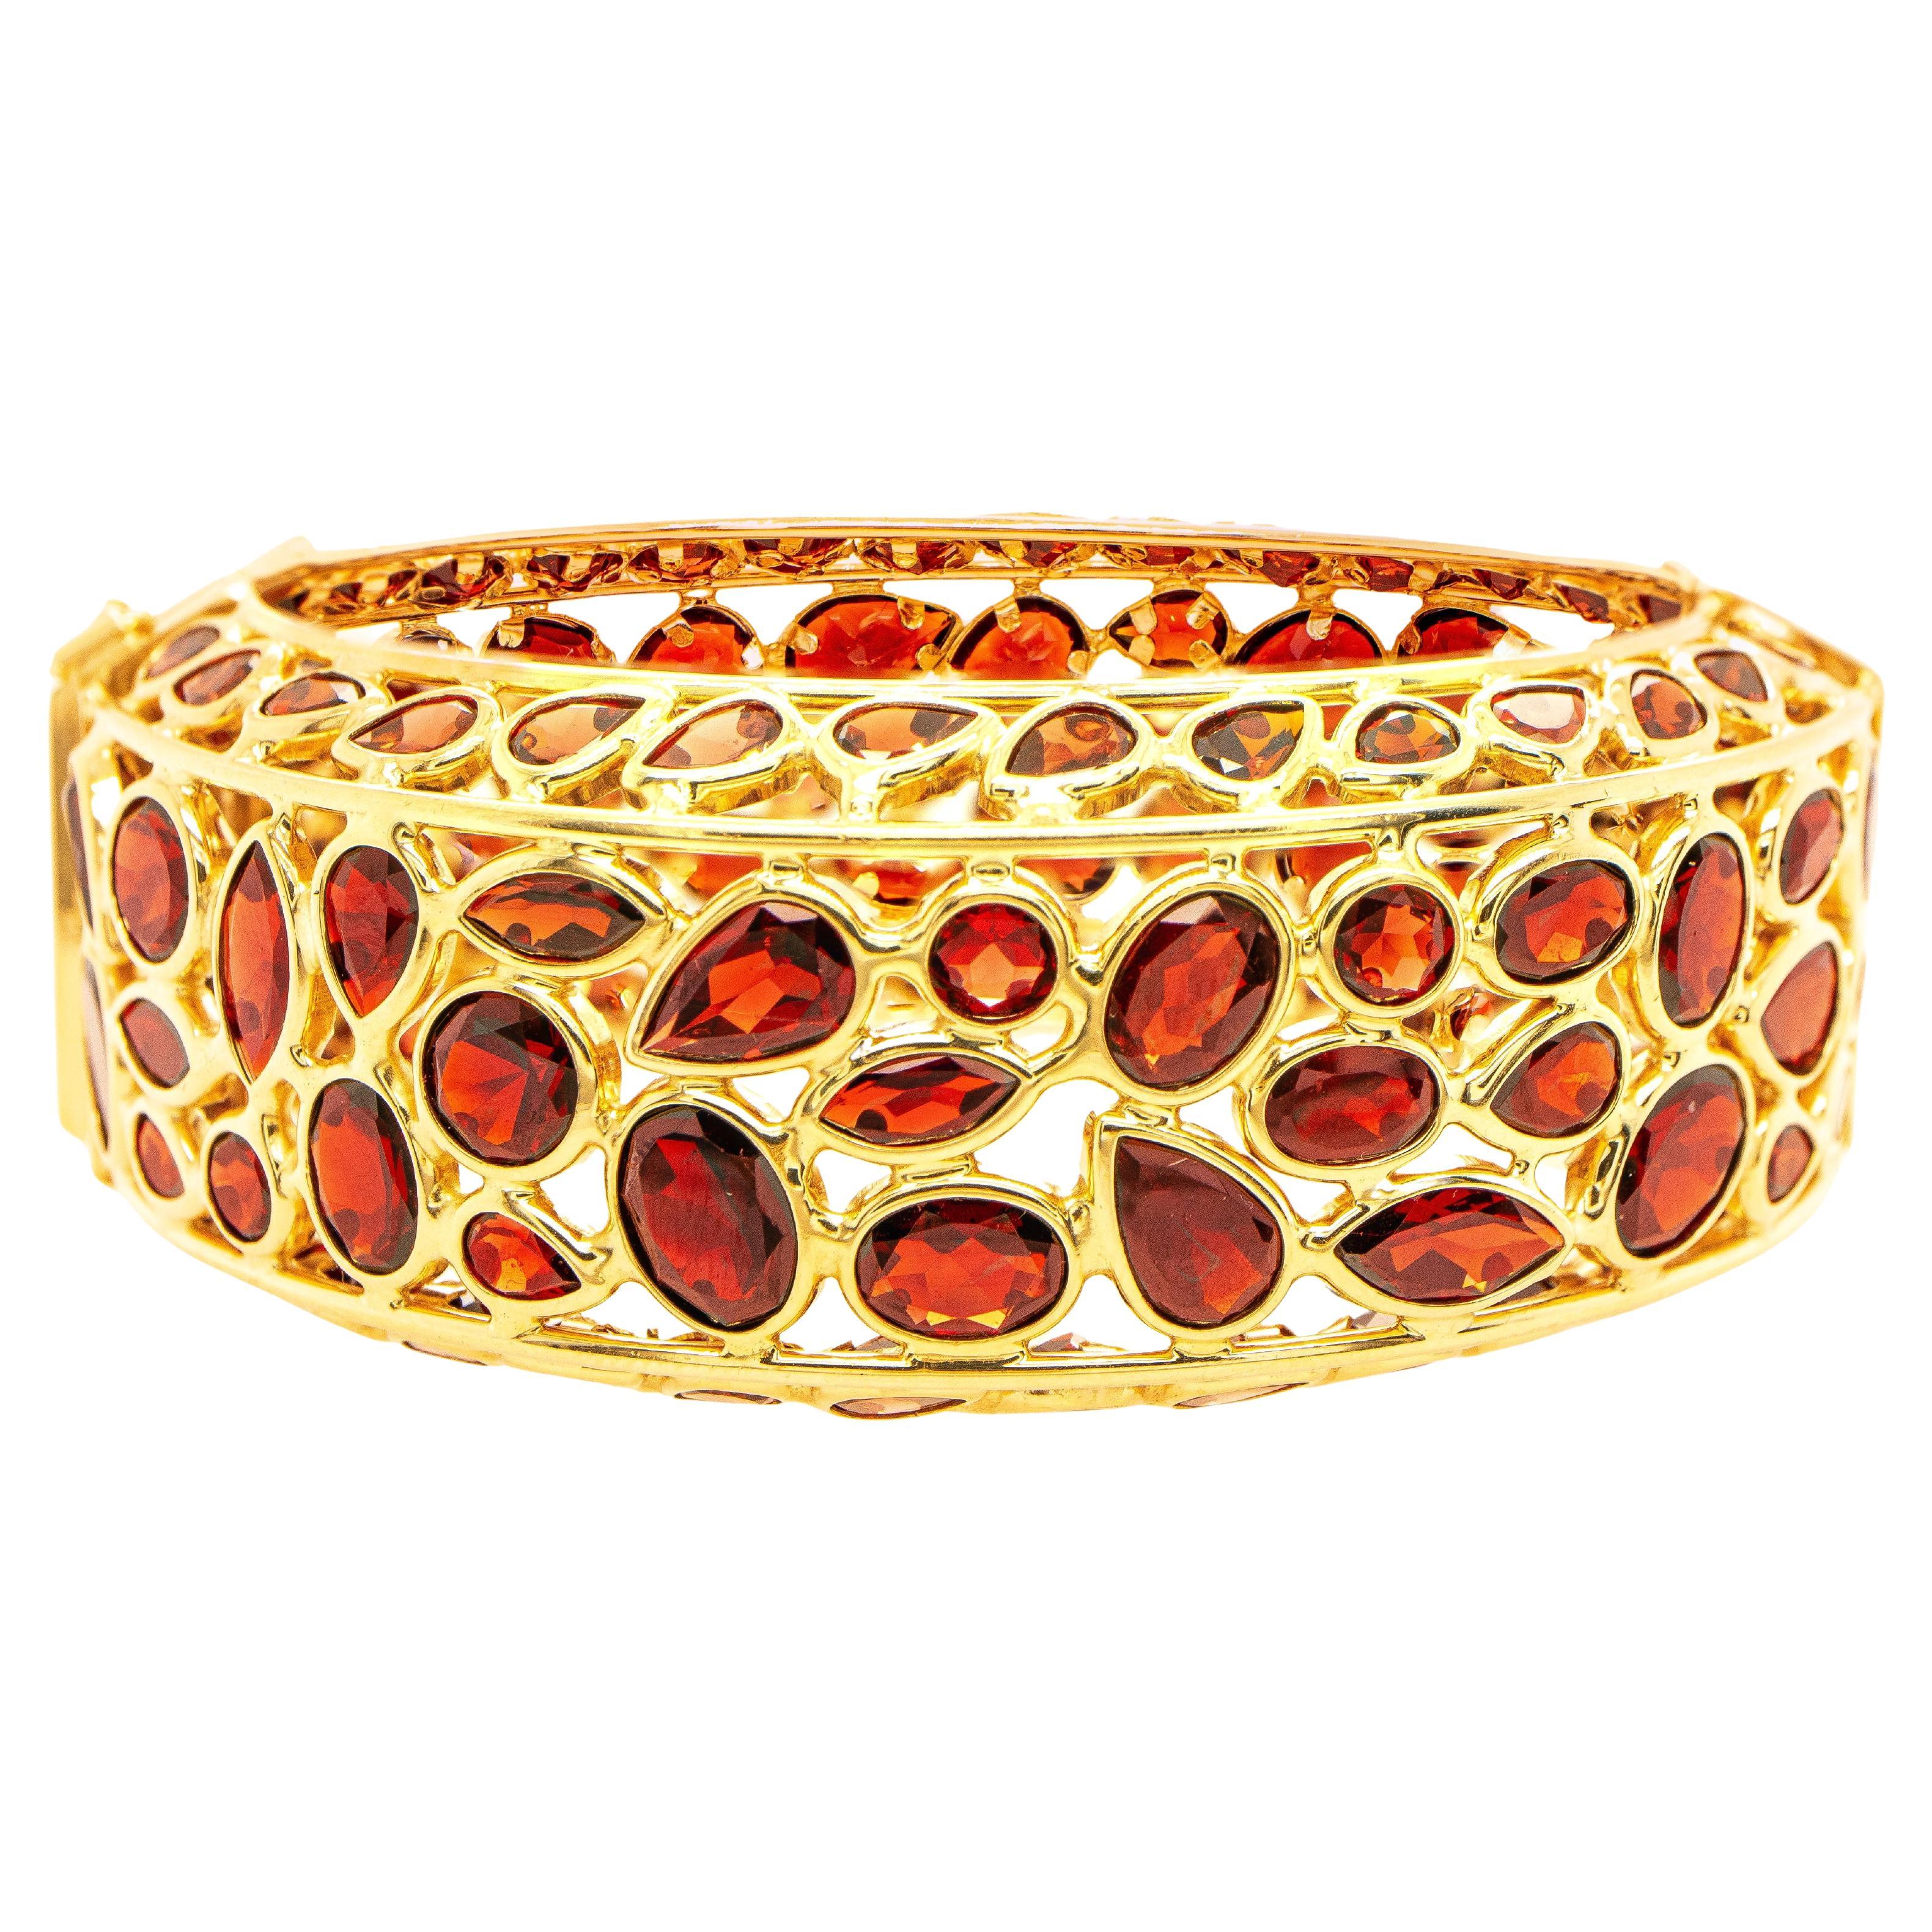 Important Cougar Bangle Bracelet Red Garnets 100 Carats 14K Yellow Gold For Sale